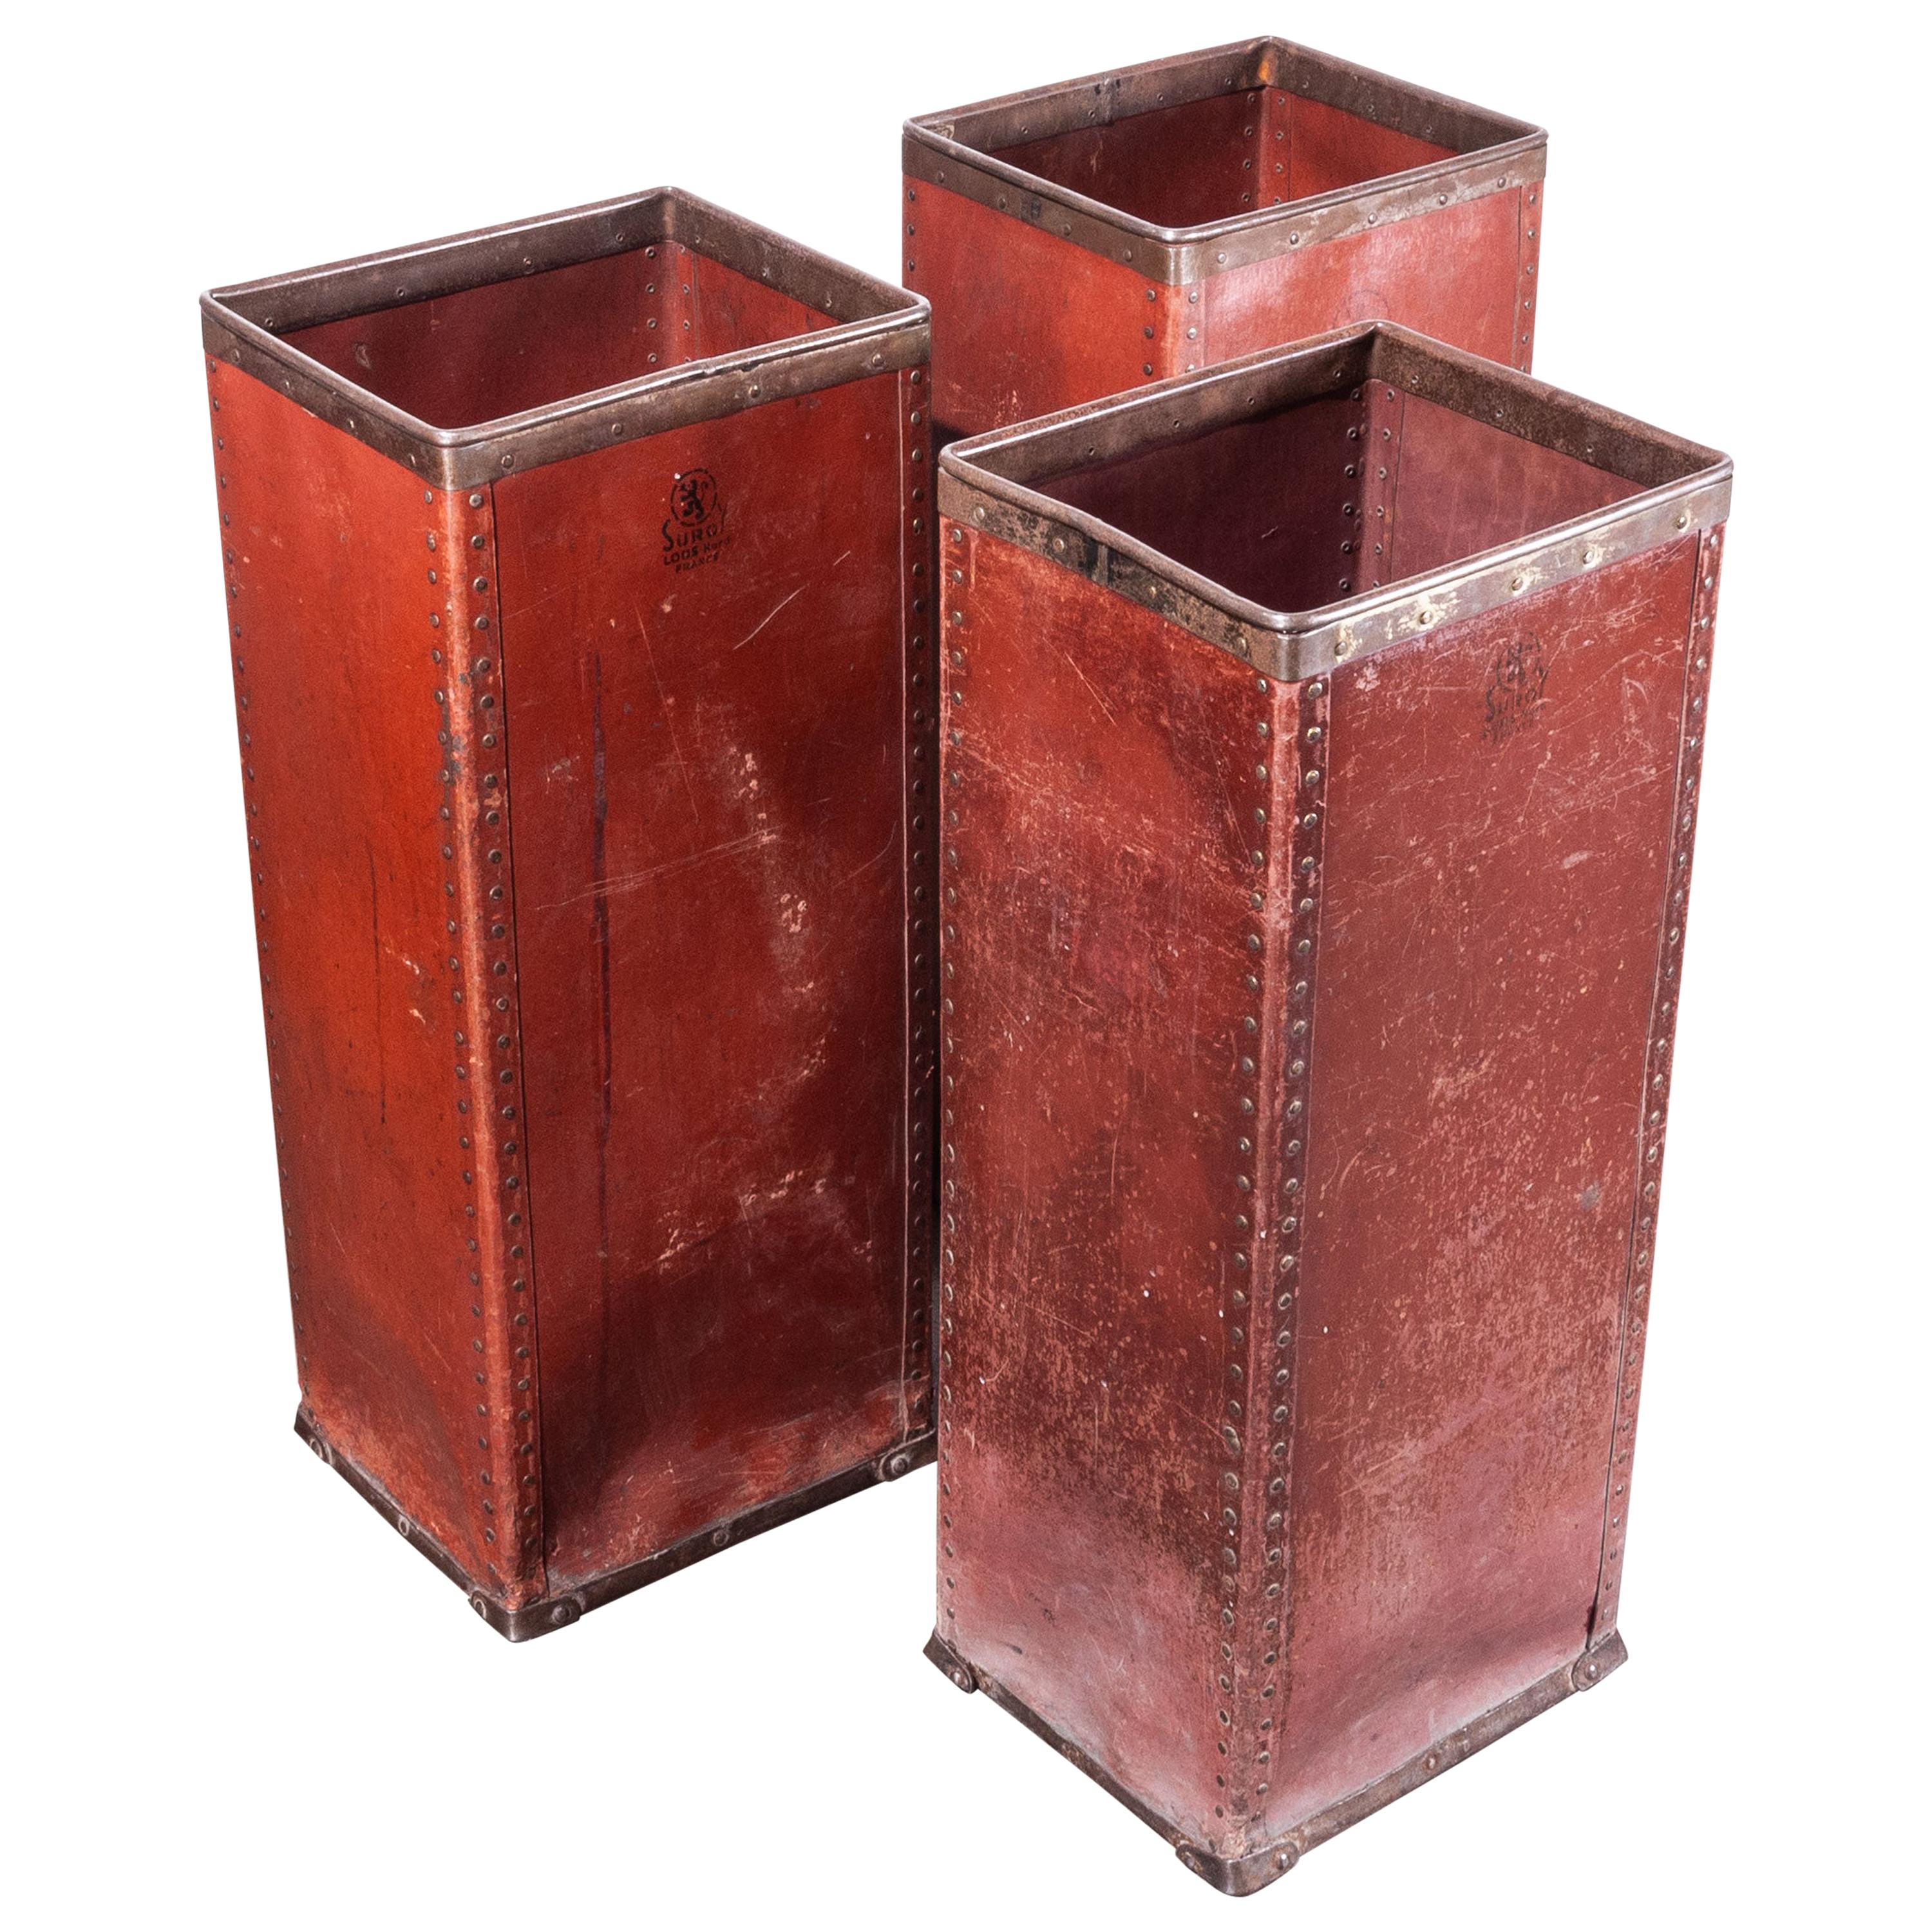 1930s Original Suroy Tall Industrial Storage Boxes